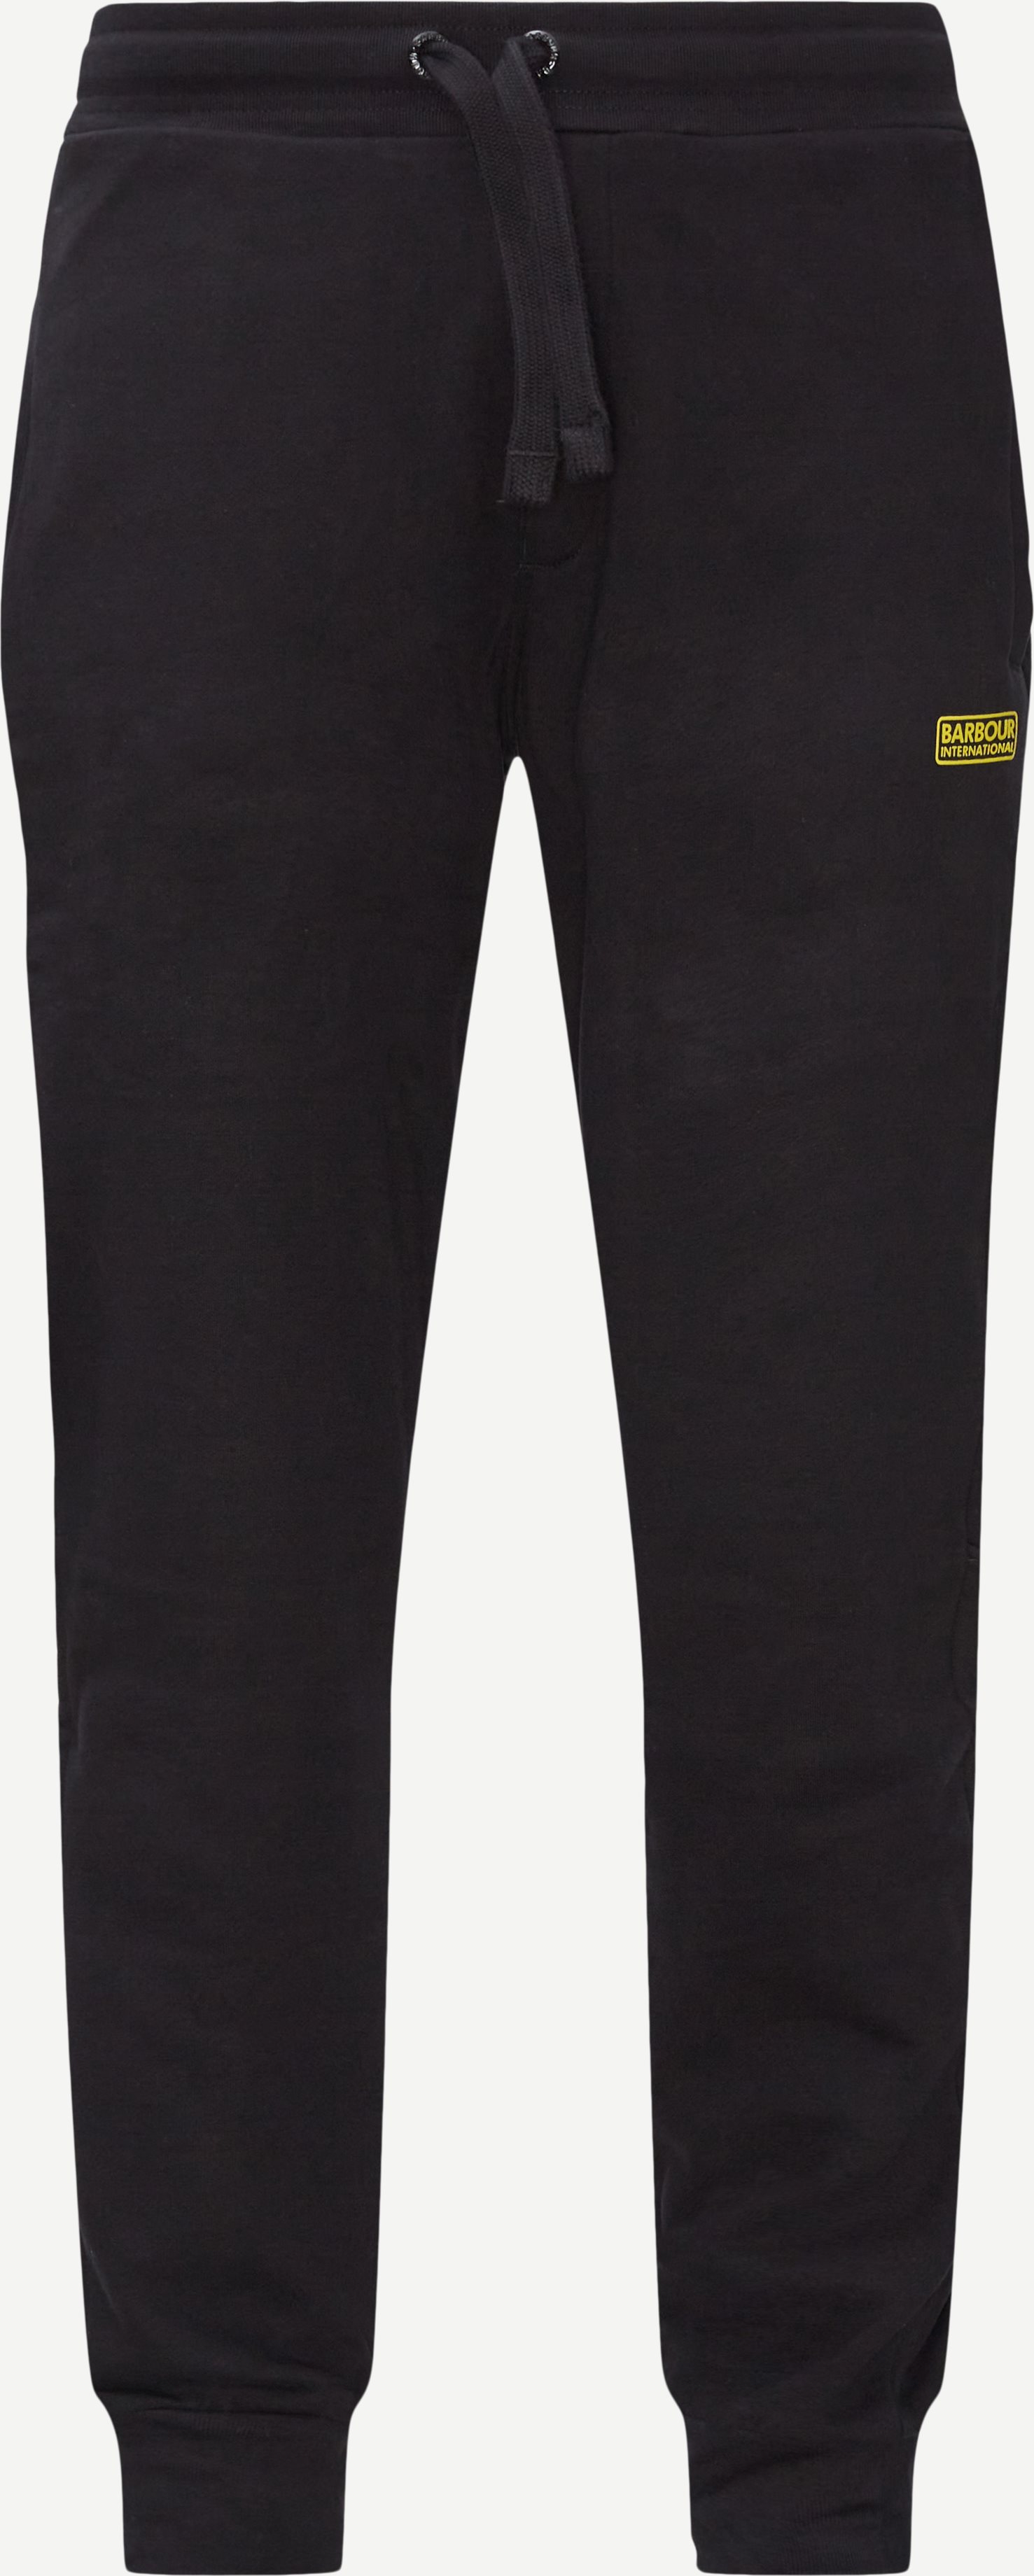 Barbour Trousers SPORT TRACK PANT Black